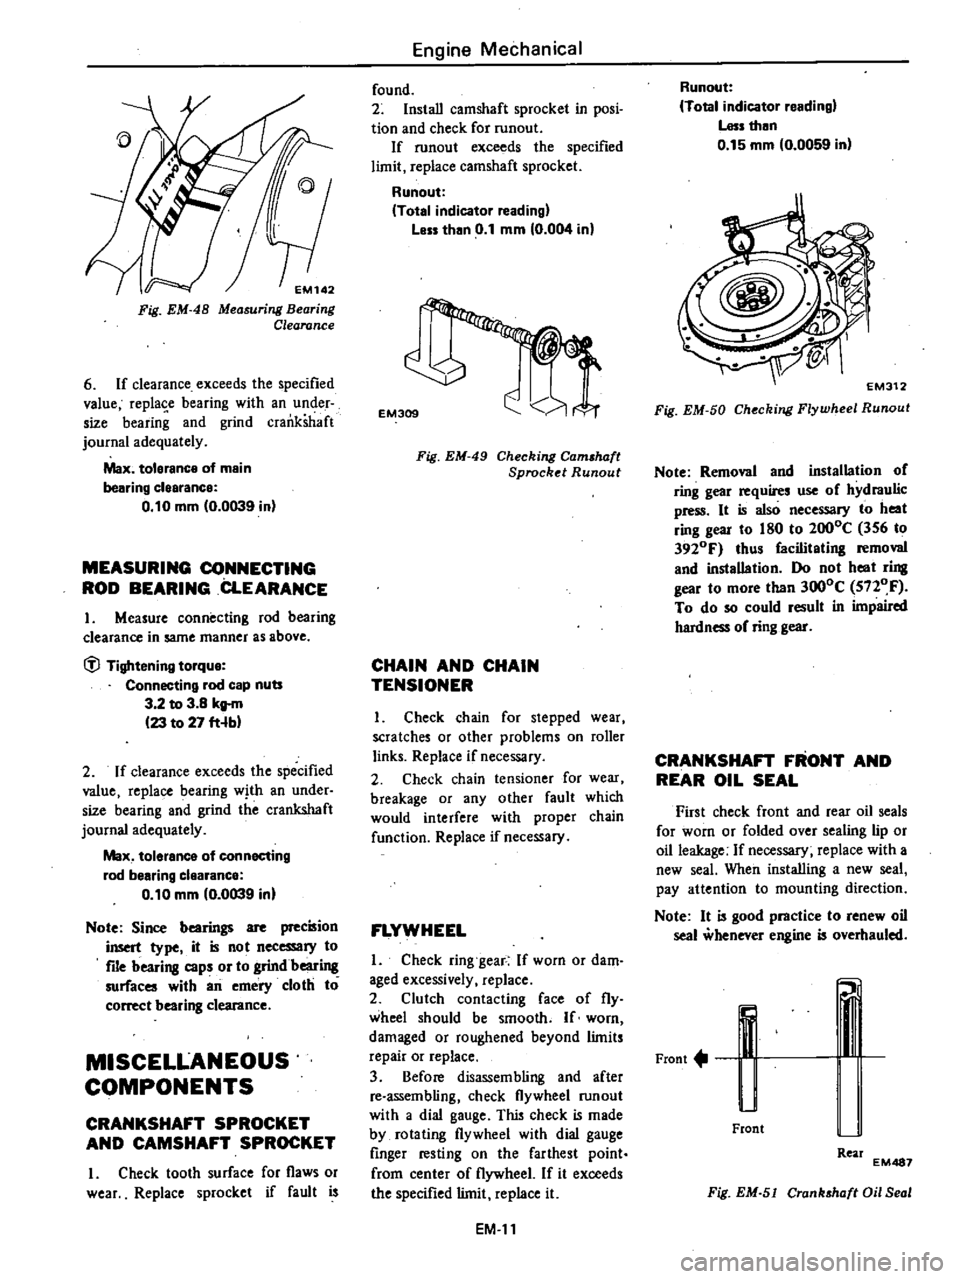 DATSUN 210 1979  Service Manual 
EM142

Fig 
EM 
48

Measuring 
Bearing

Clearance

6 
If 
clearance 
exceeds 
the

specified

value

replase 
bearing 
with 
an 
under

size

bearing 
and

grind 
crankshaft

journal 
adequately

Max